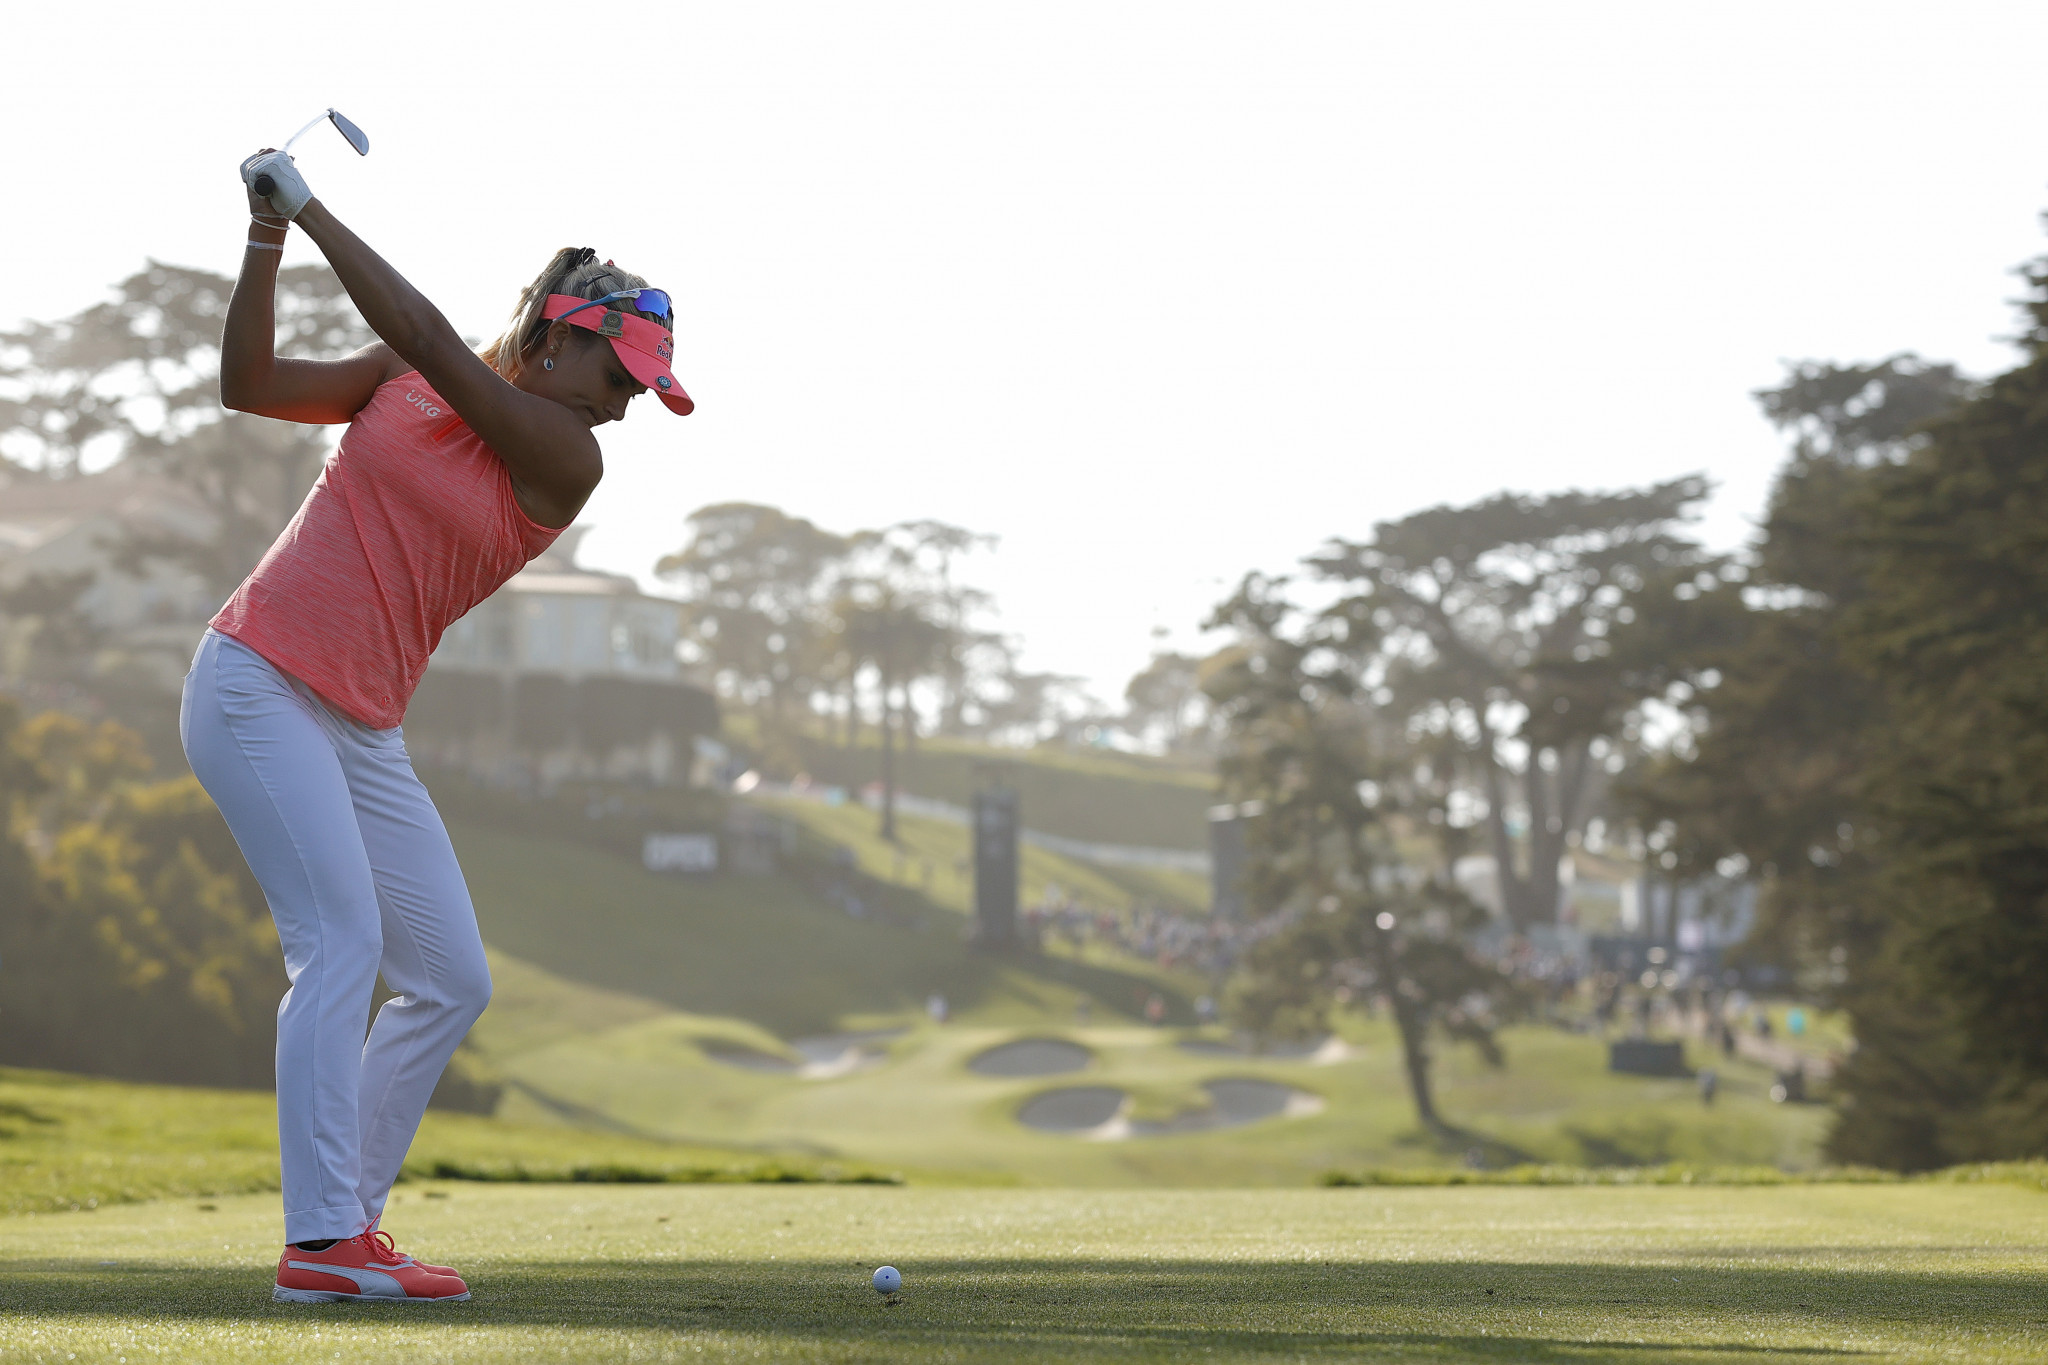 With 18 holes to play, Lexi Thompson leads the US Women's Open ©Getty Images